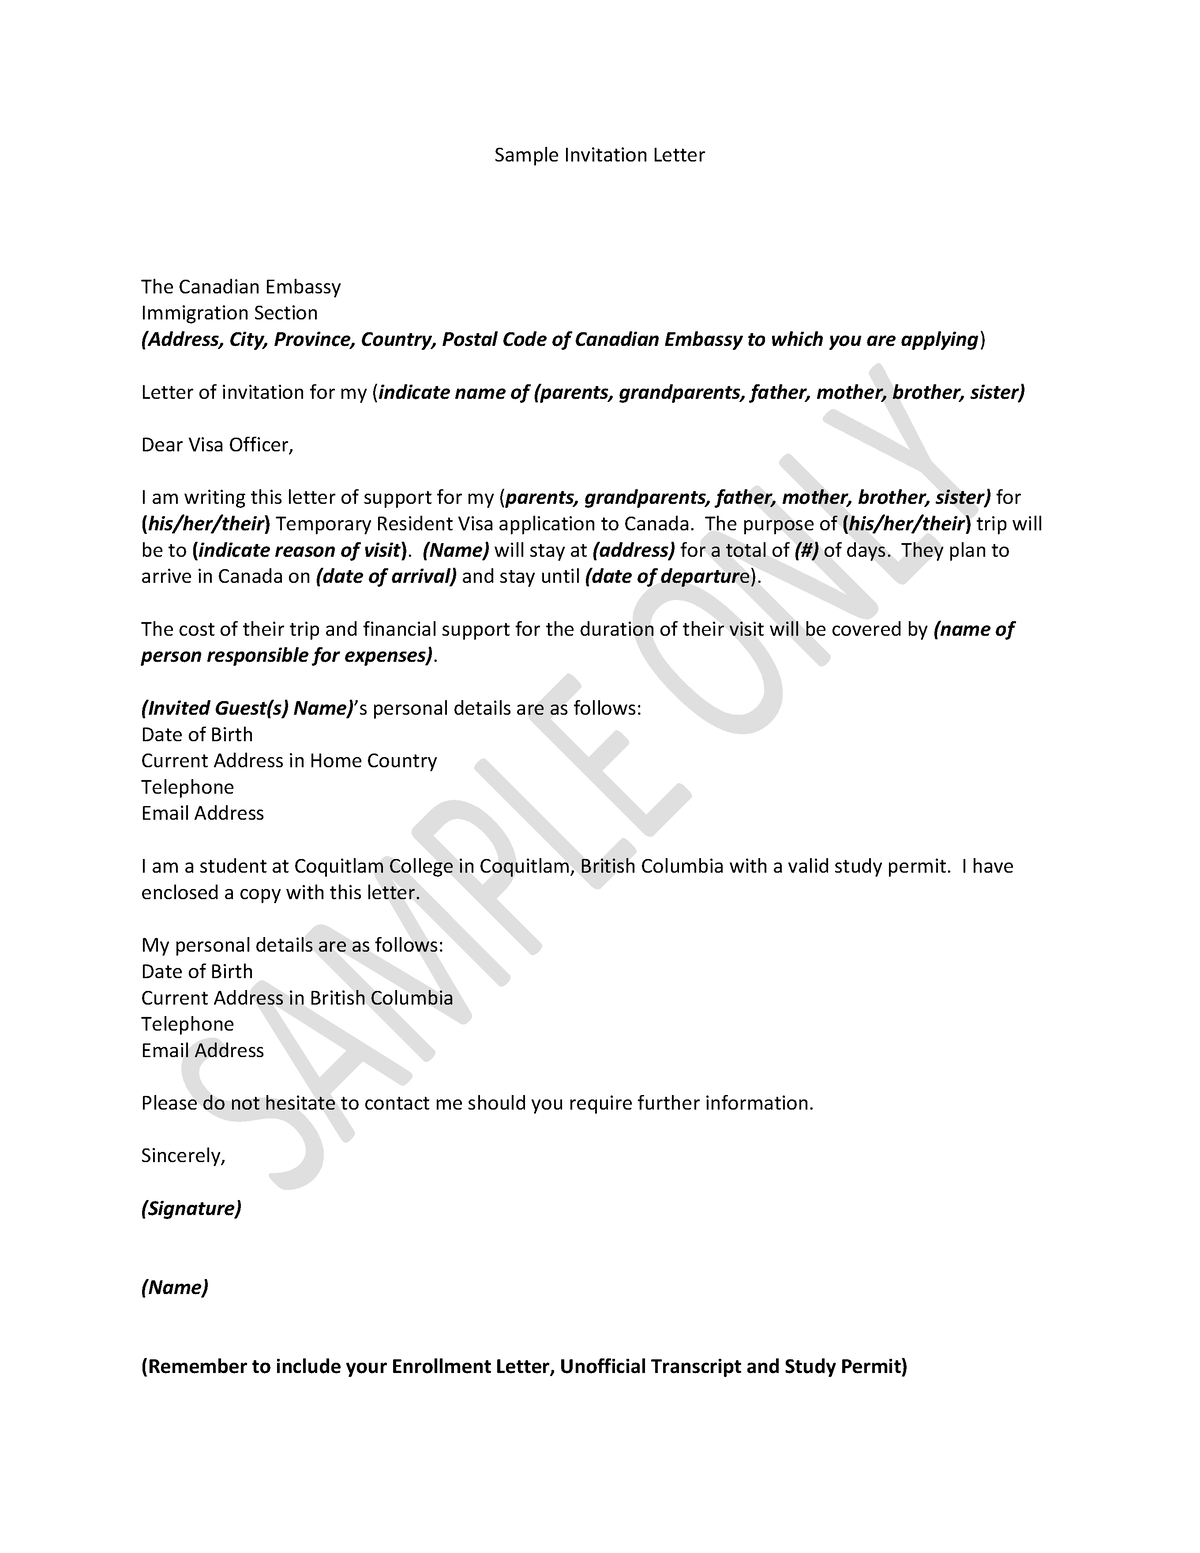 Sample Invitation Letter Sample Invitation Letter The Canadian Embassy Immigration Section 6658